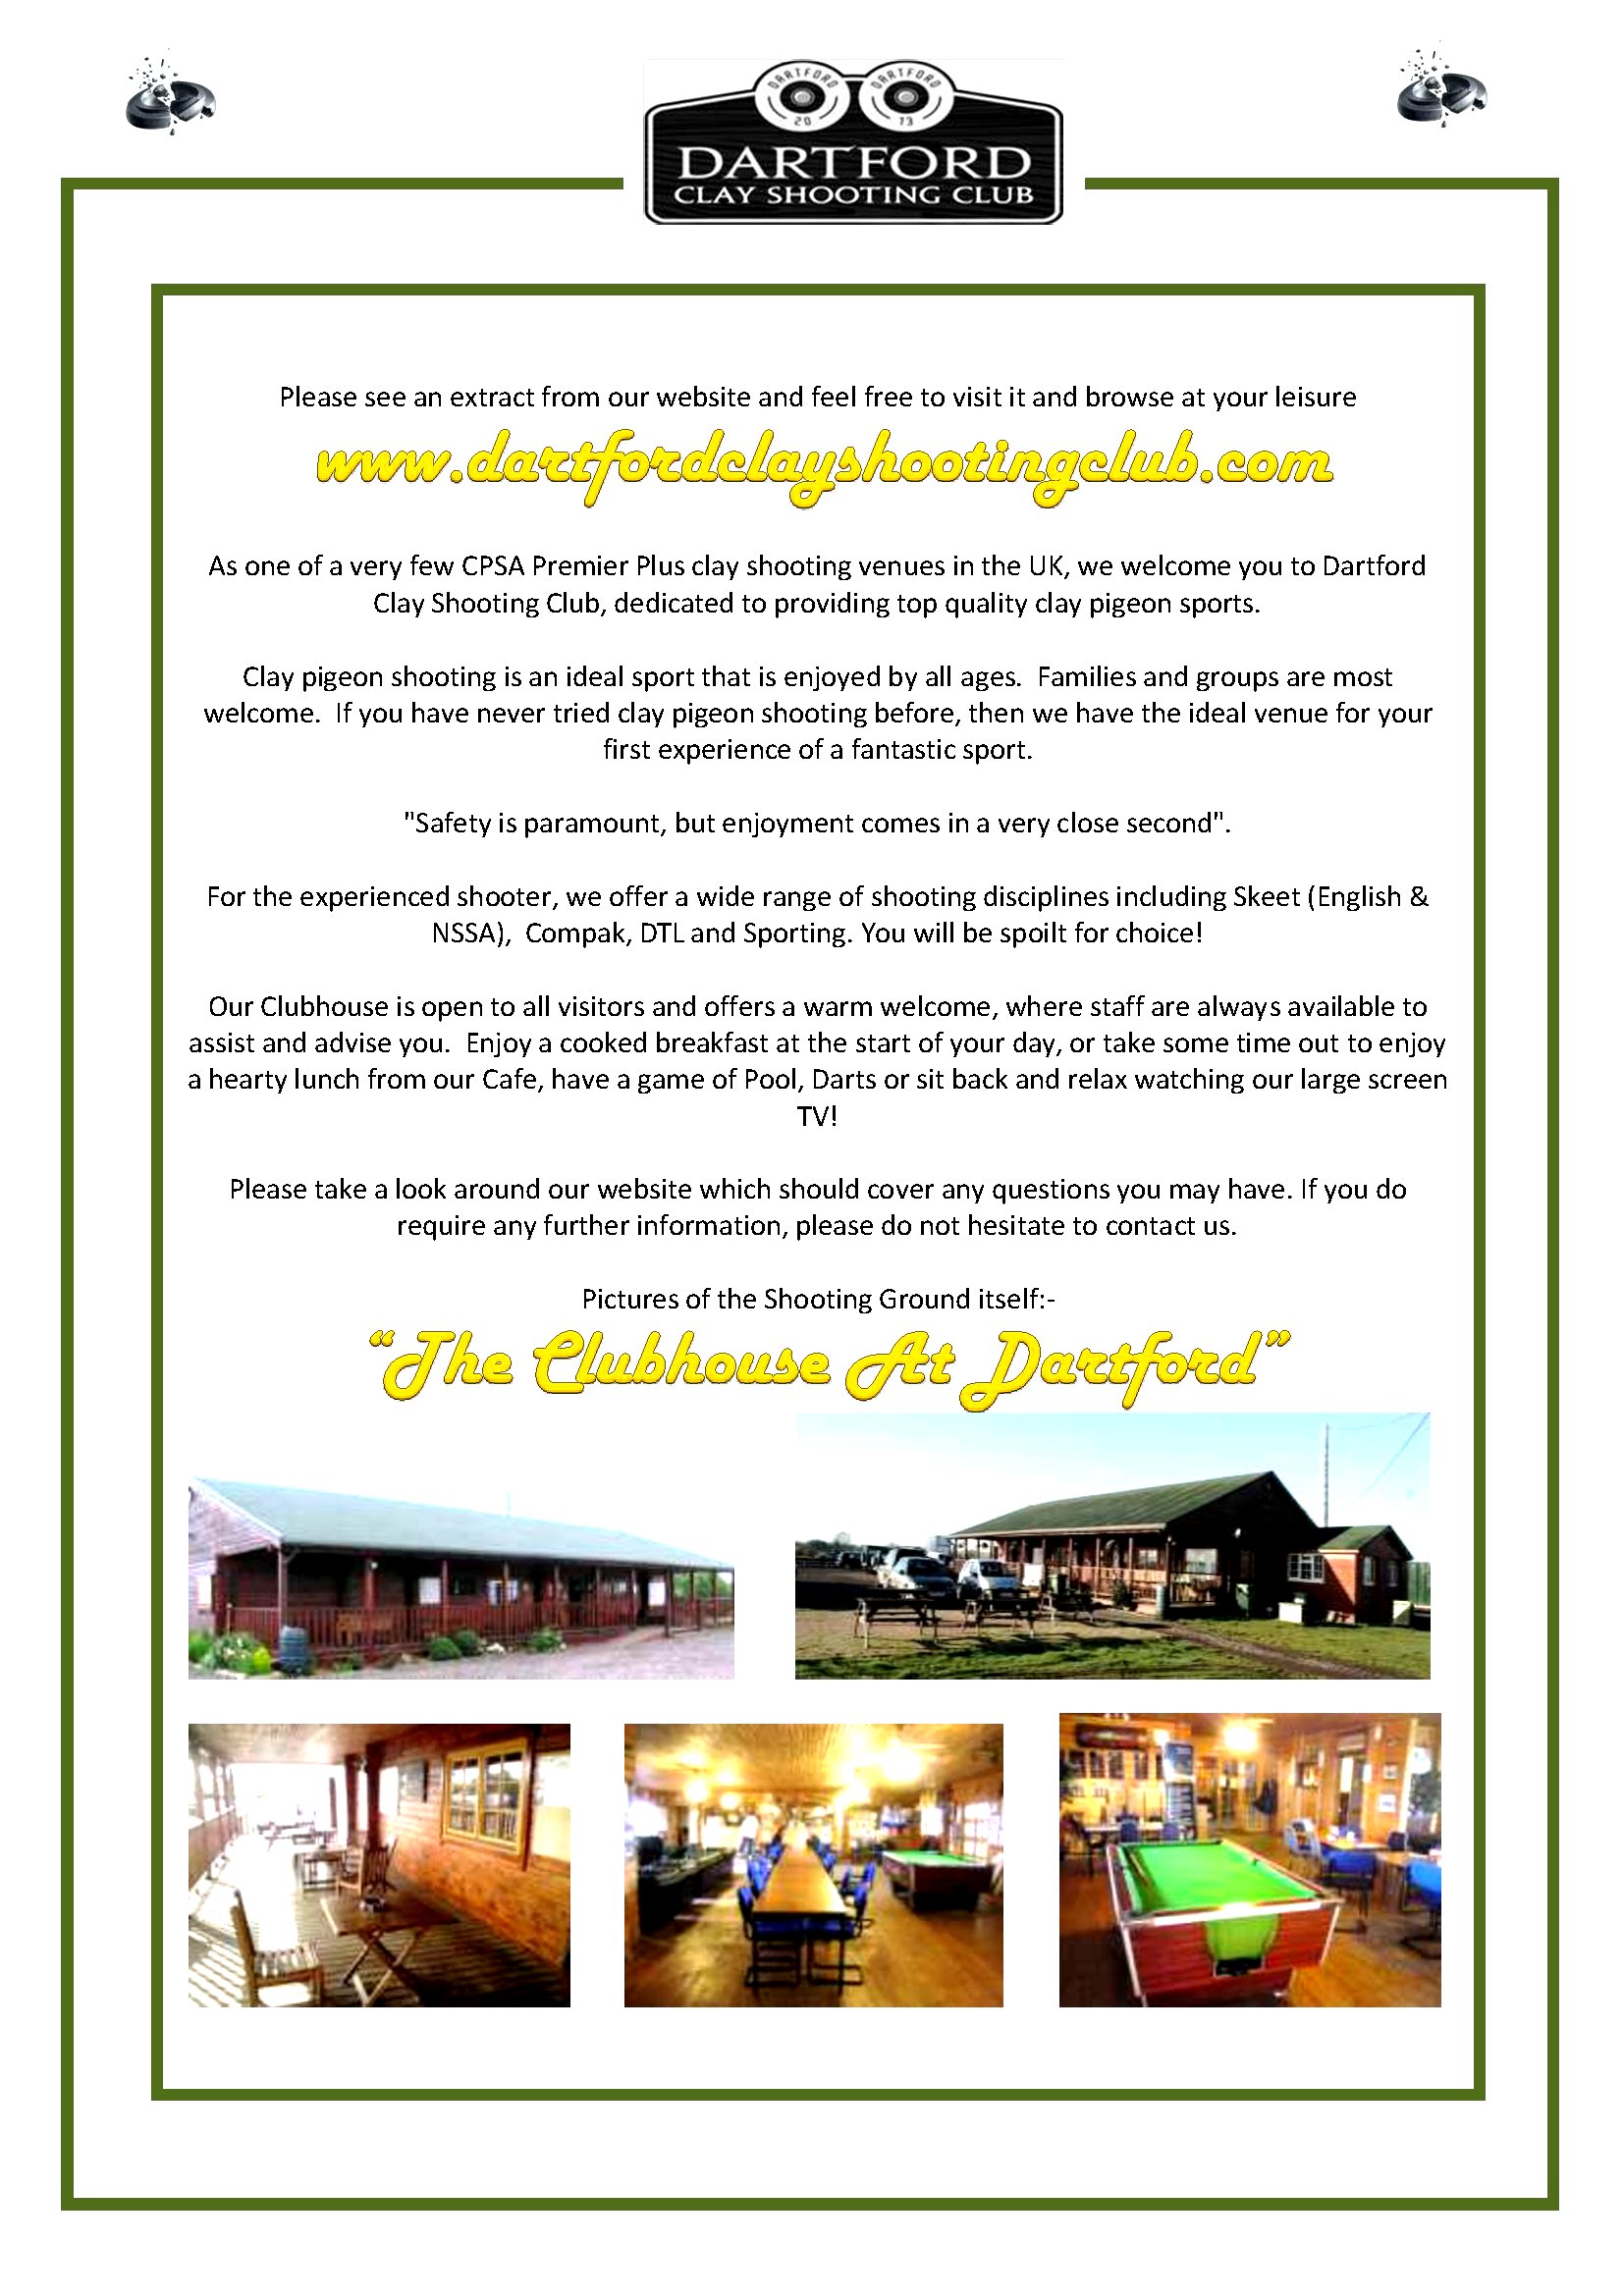 DARTFORD CLAY SHOOTING CLUBS INTRODUCTION LETTER